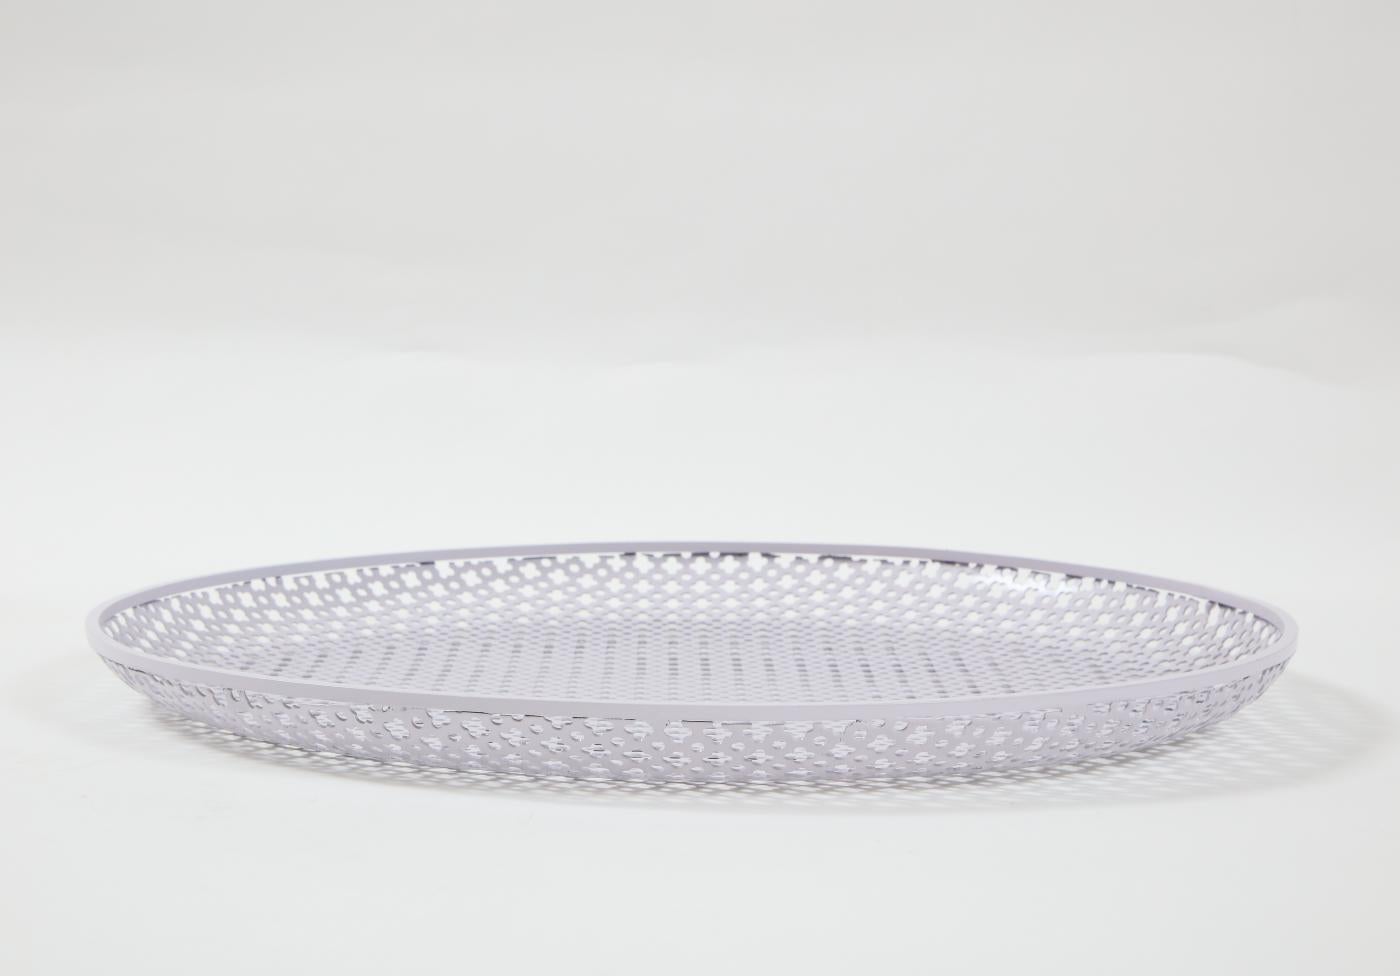 White Round Perforated Metal Tray by Mathieu Mategot, France, c. 1950 For Sale 2